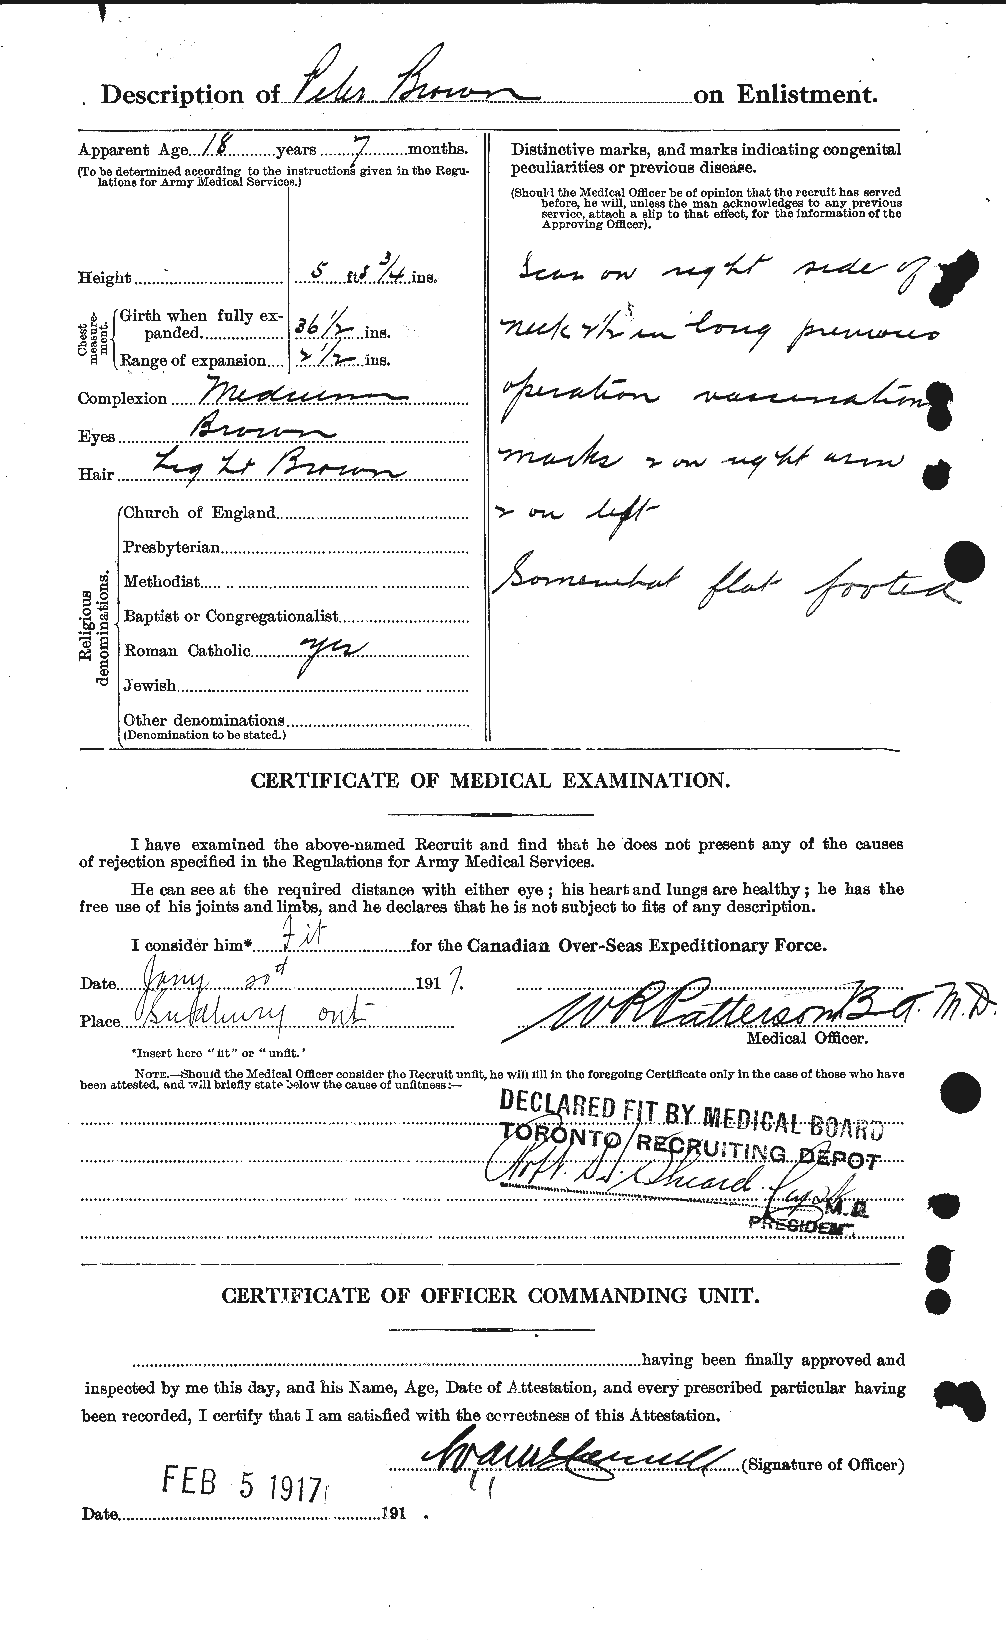 Personnel Records of the First World War - CEF 267190b